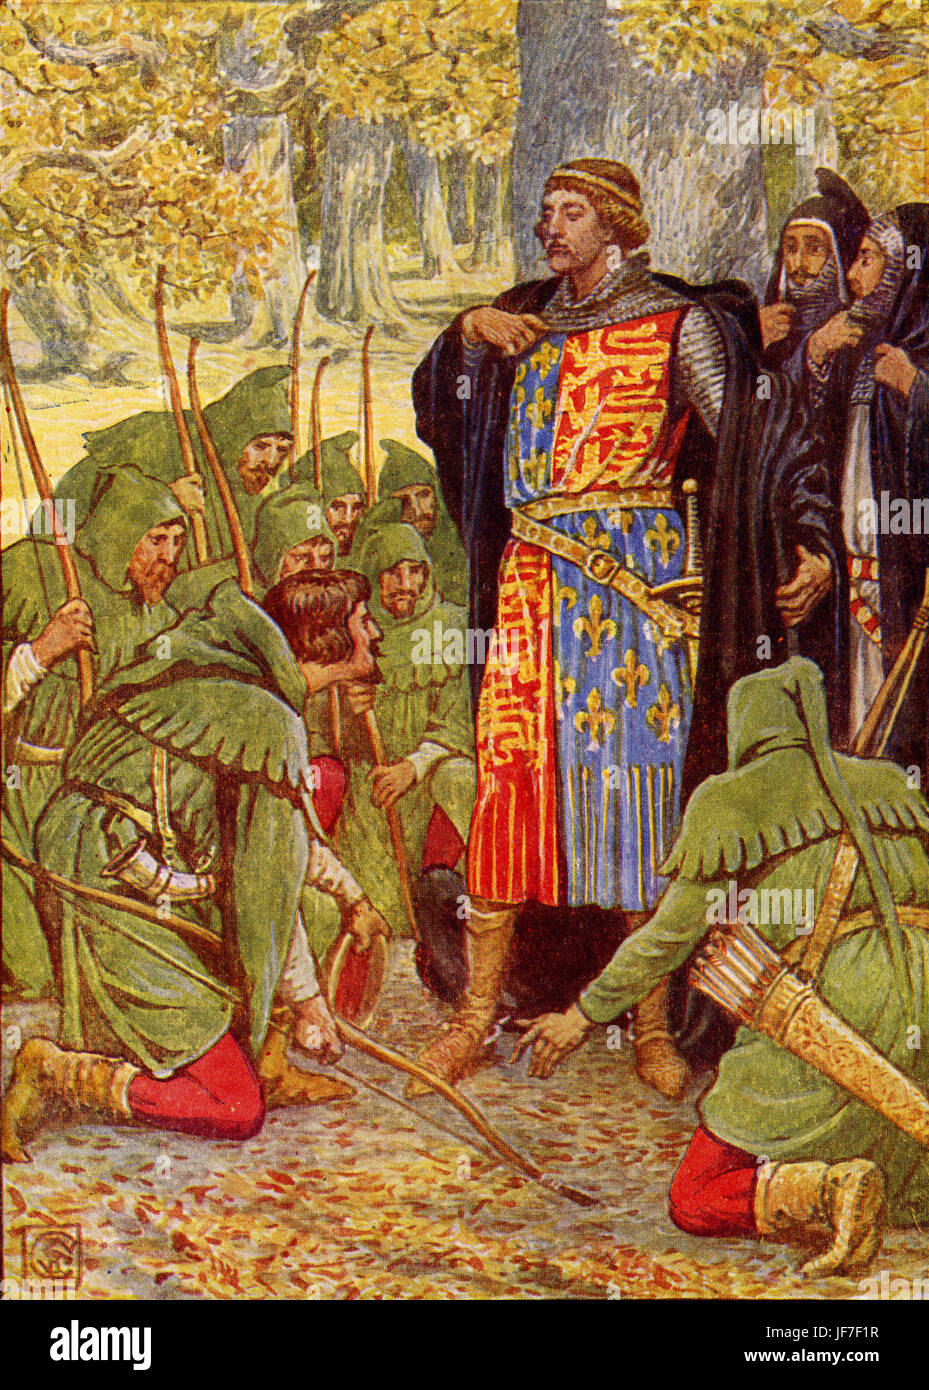 Robin Hood and the men of the Greenwood by Henry Gilbert. Caption reads: 'Robin hood and his men kneel to the King'. Illustrated by Walter Crane. C.1912 Stock Photo